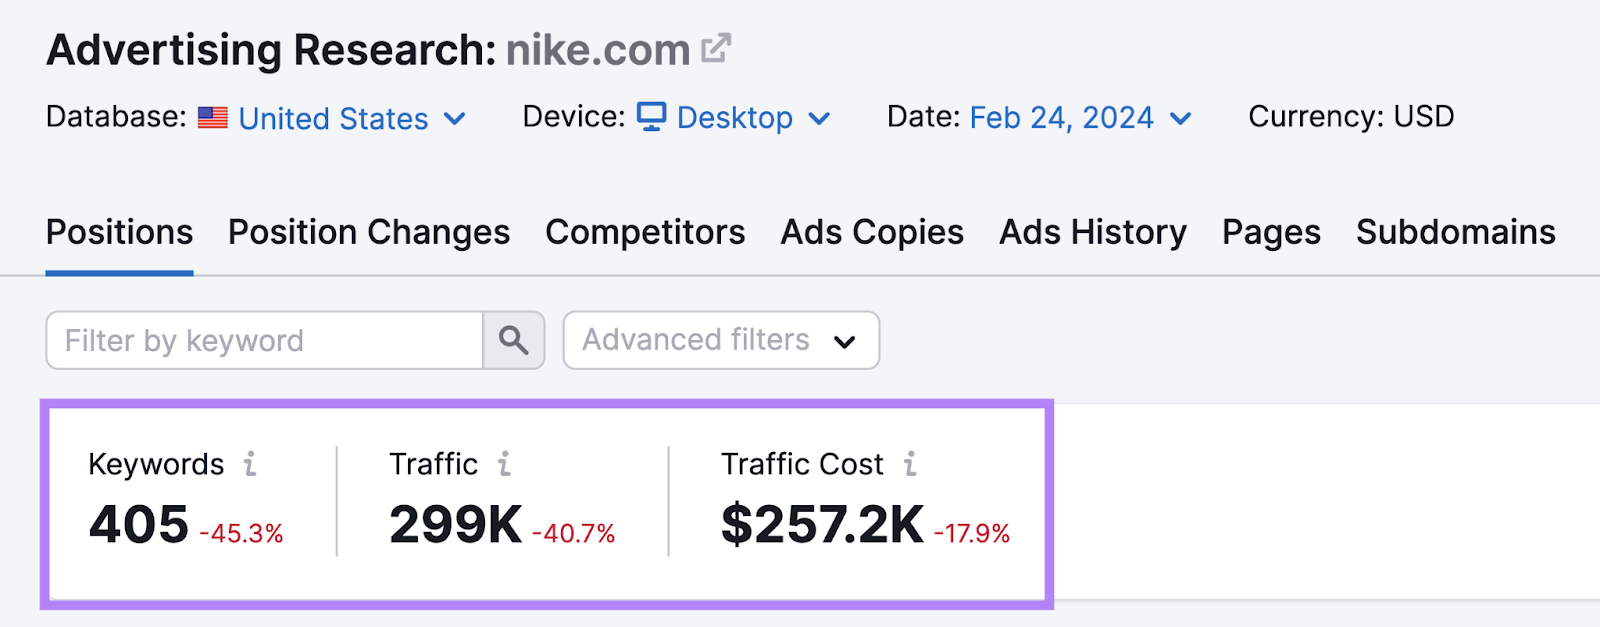 "Keyword," "Traffic," and "Total Cost" metrics for "nike.com" in Advertising Research tool